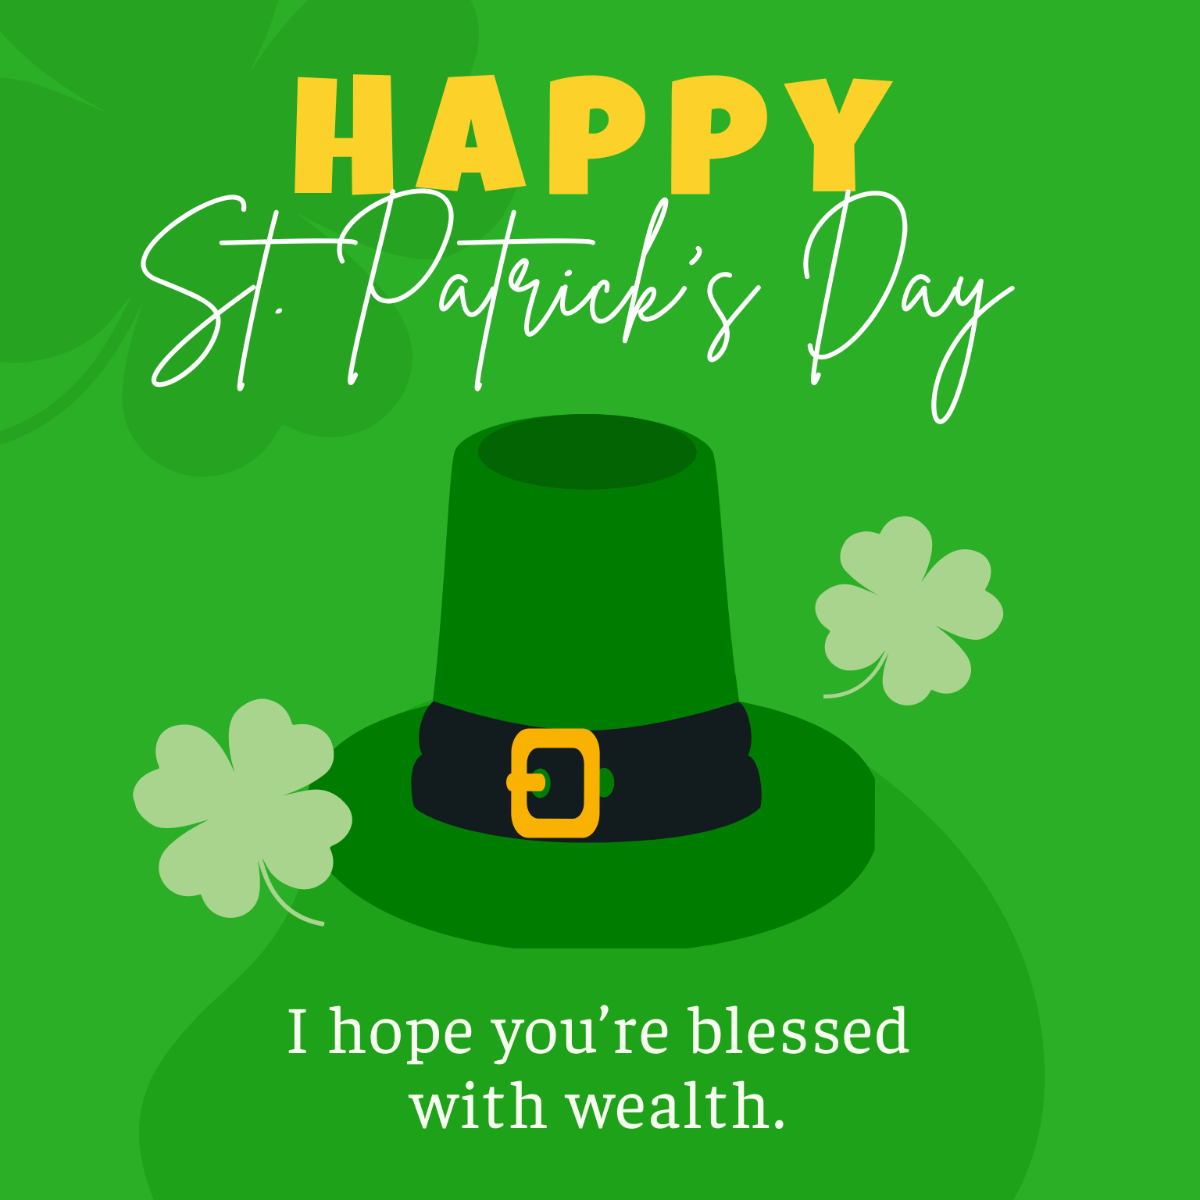 St. Patrick's Day Greeting Card Vector